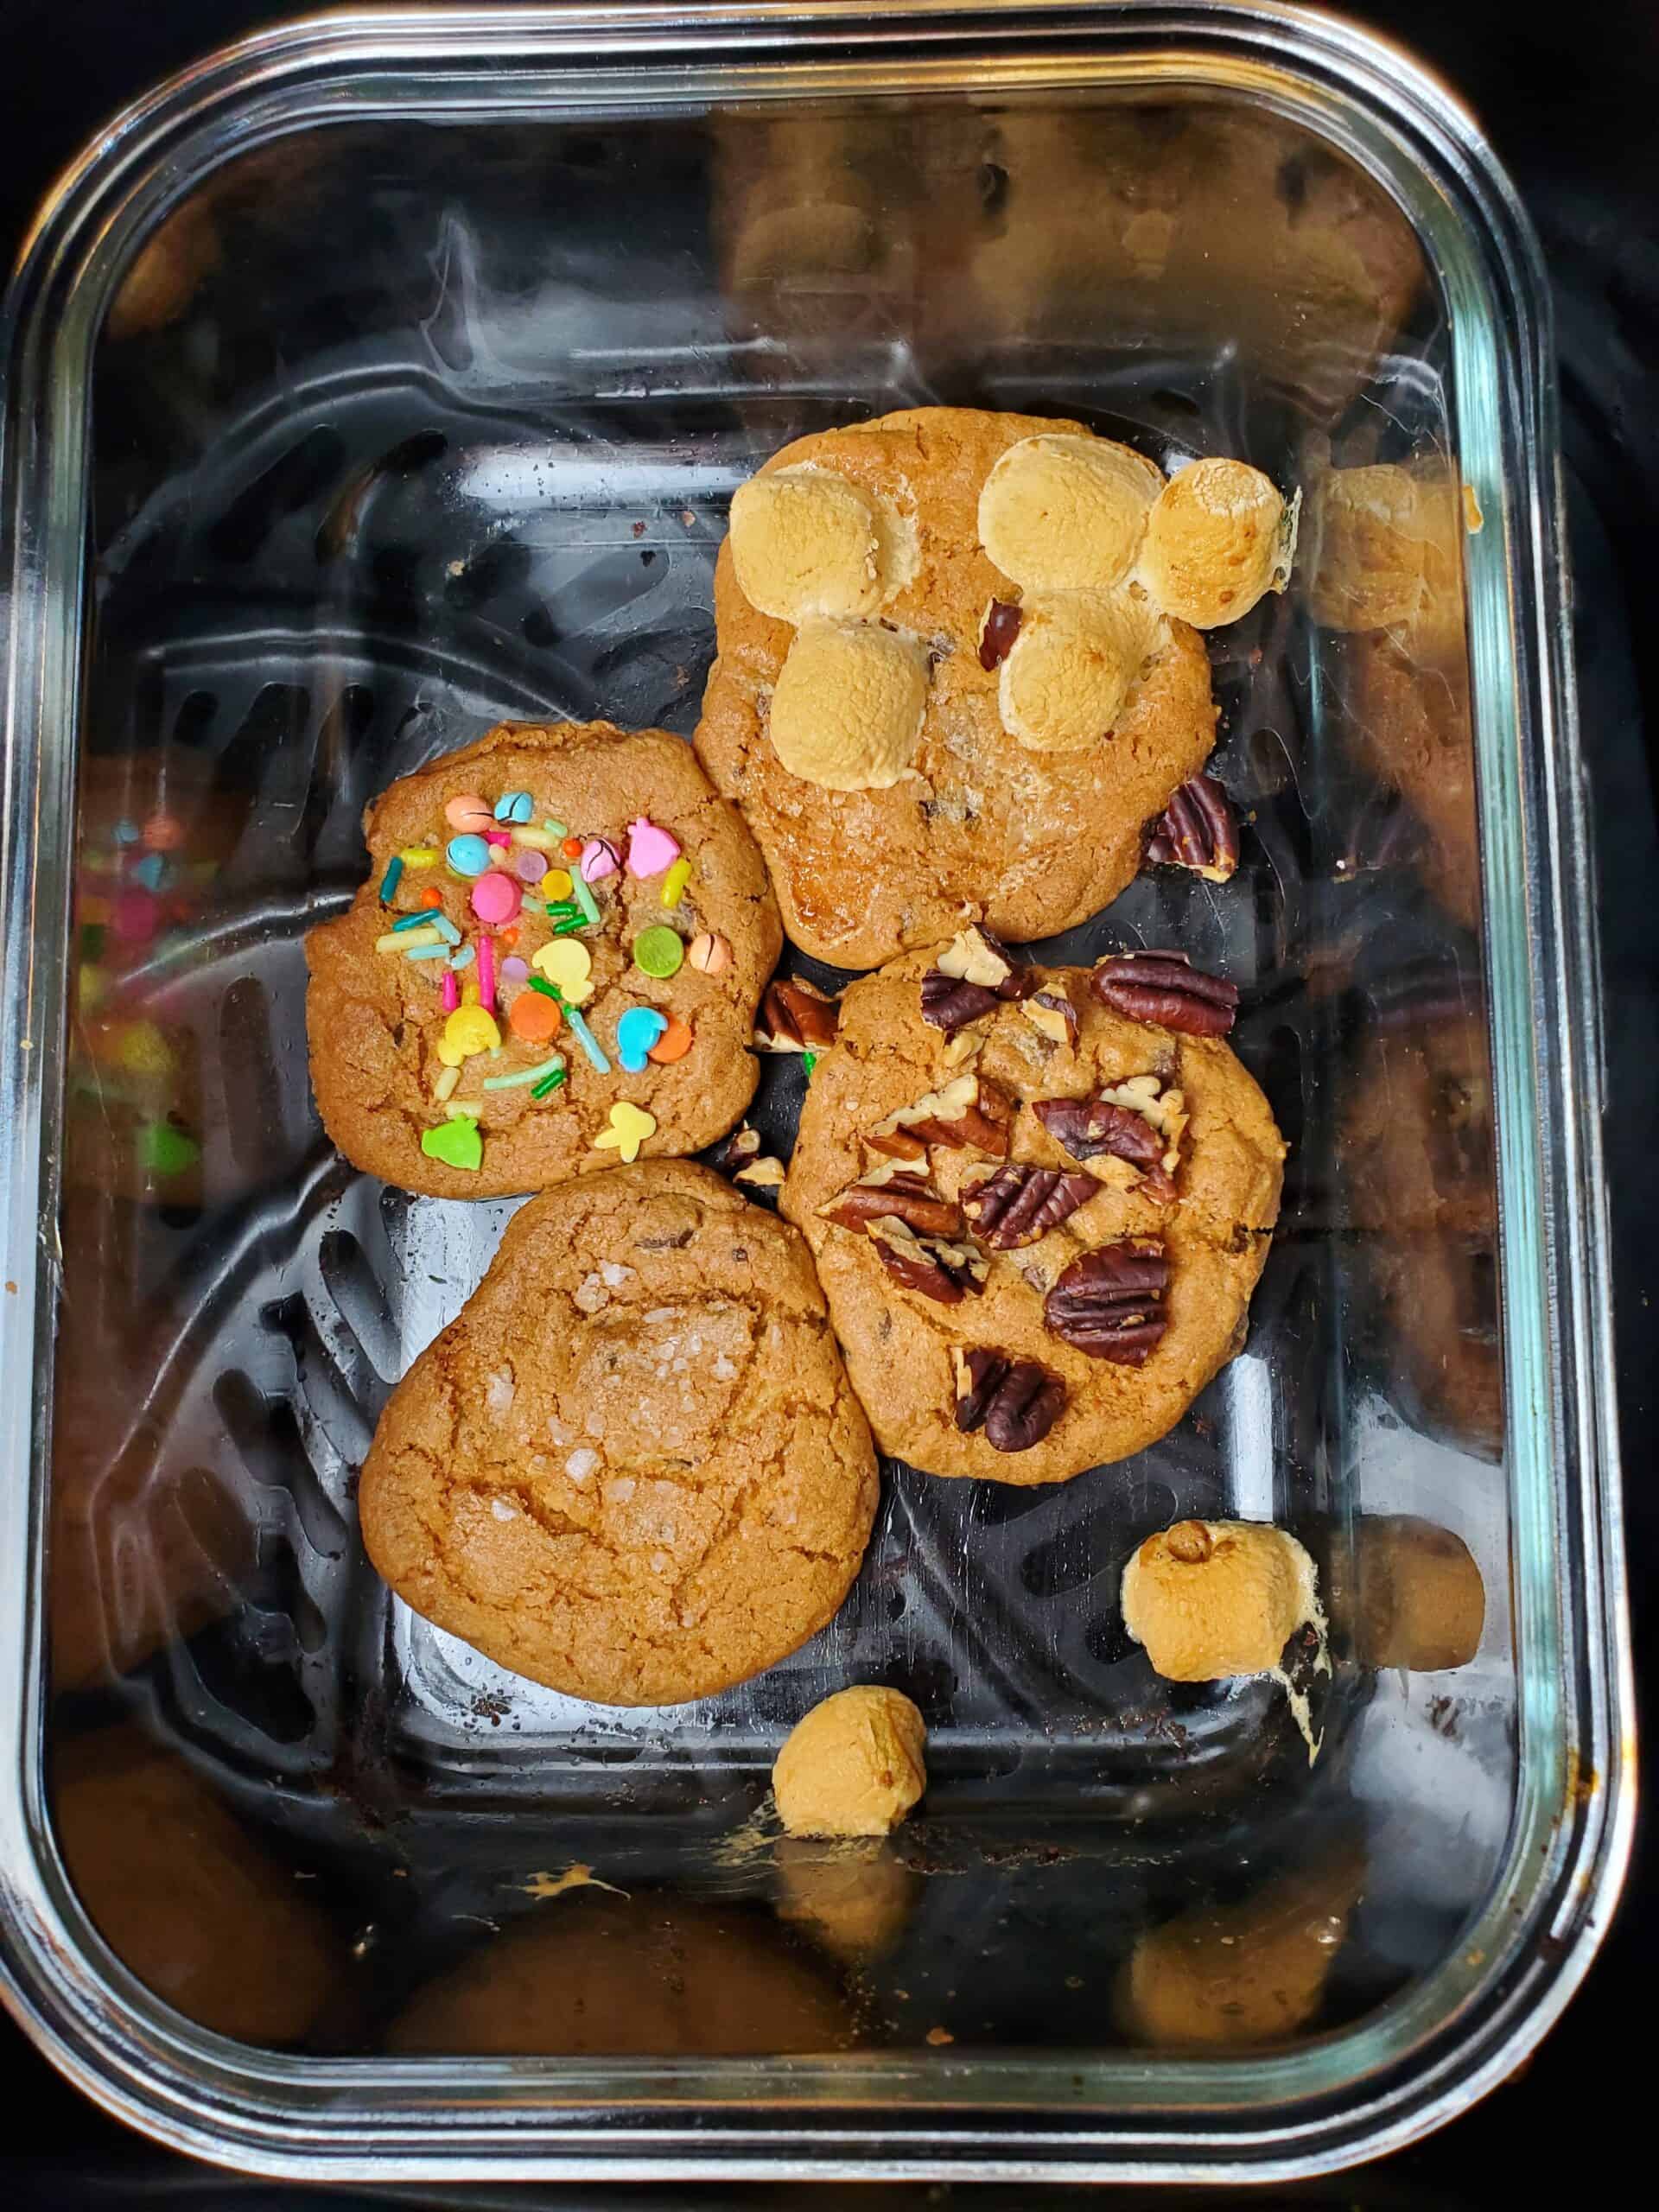 Baked cookies with toppings in a glass container in the air fryer.